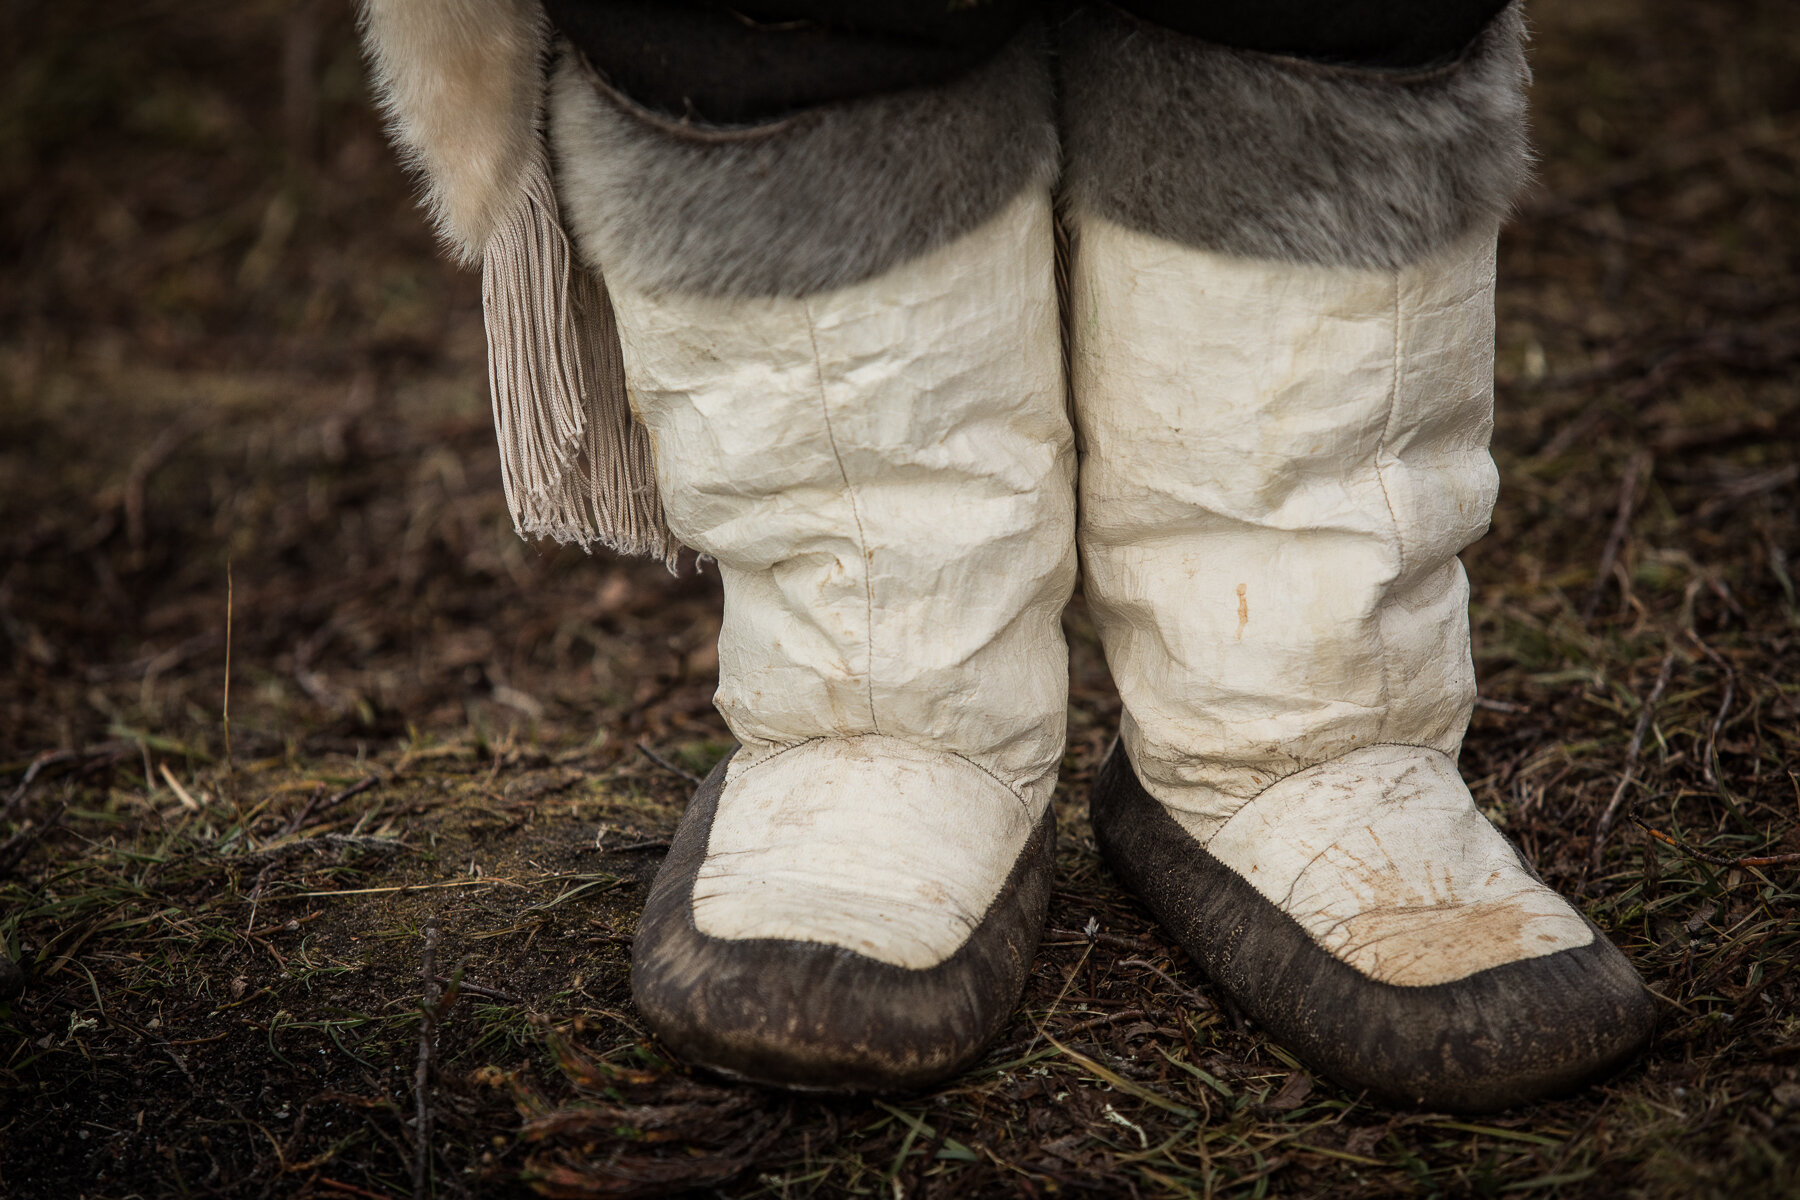  Canadian High Arctic - Pond Inlet - Original Uggs. Bearded Seals are coveted when it comes to footwear for their thick skin 